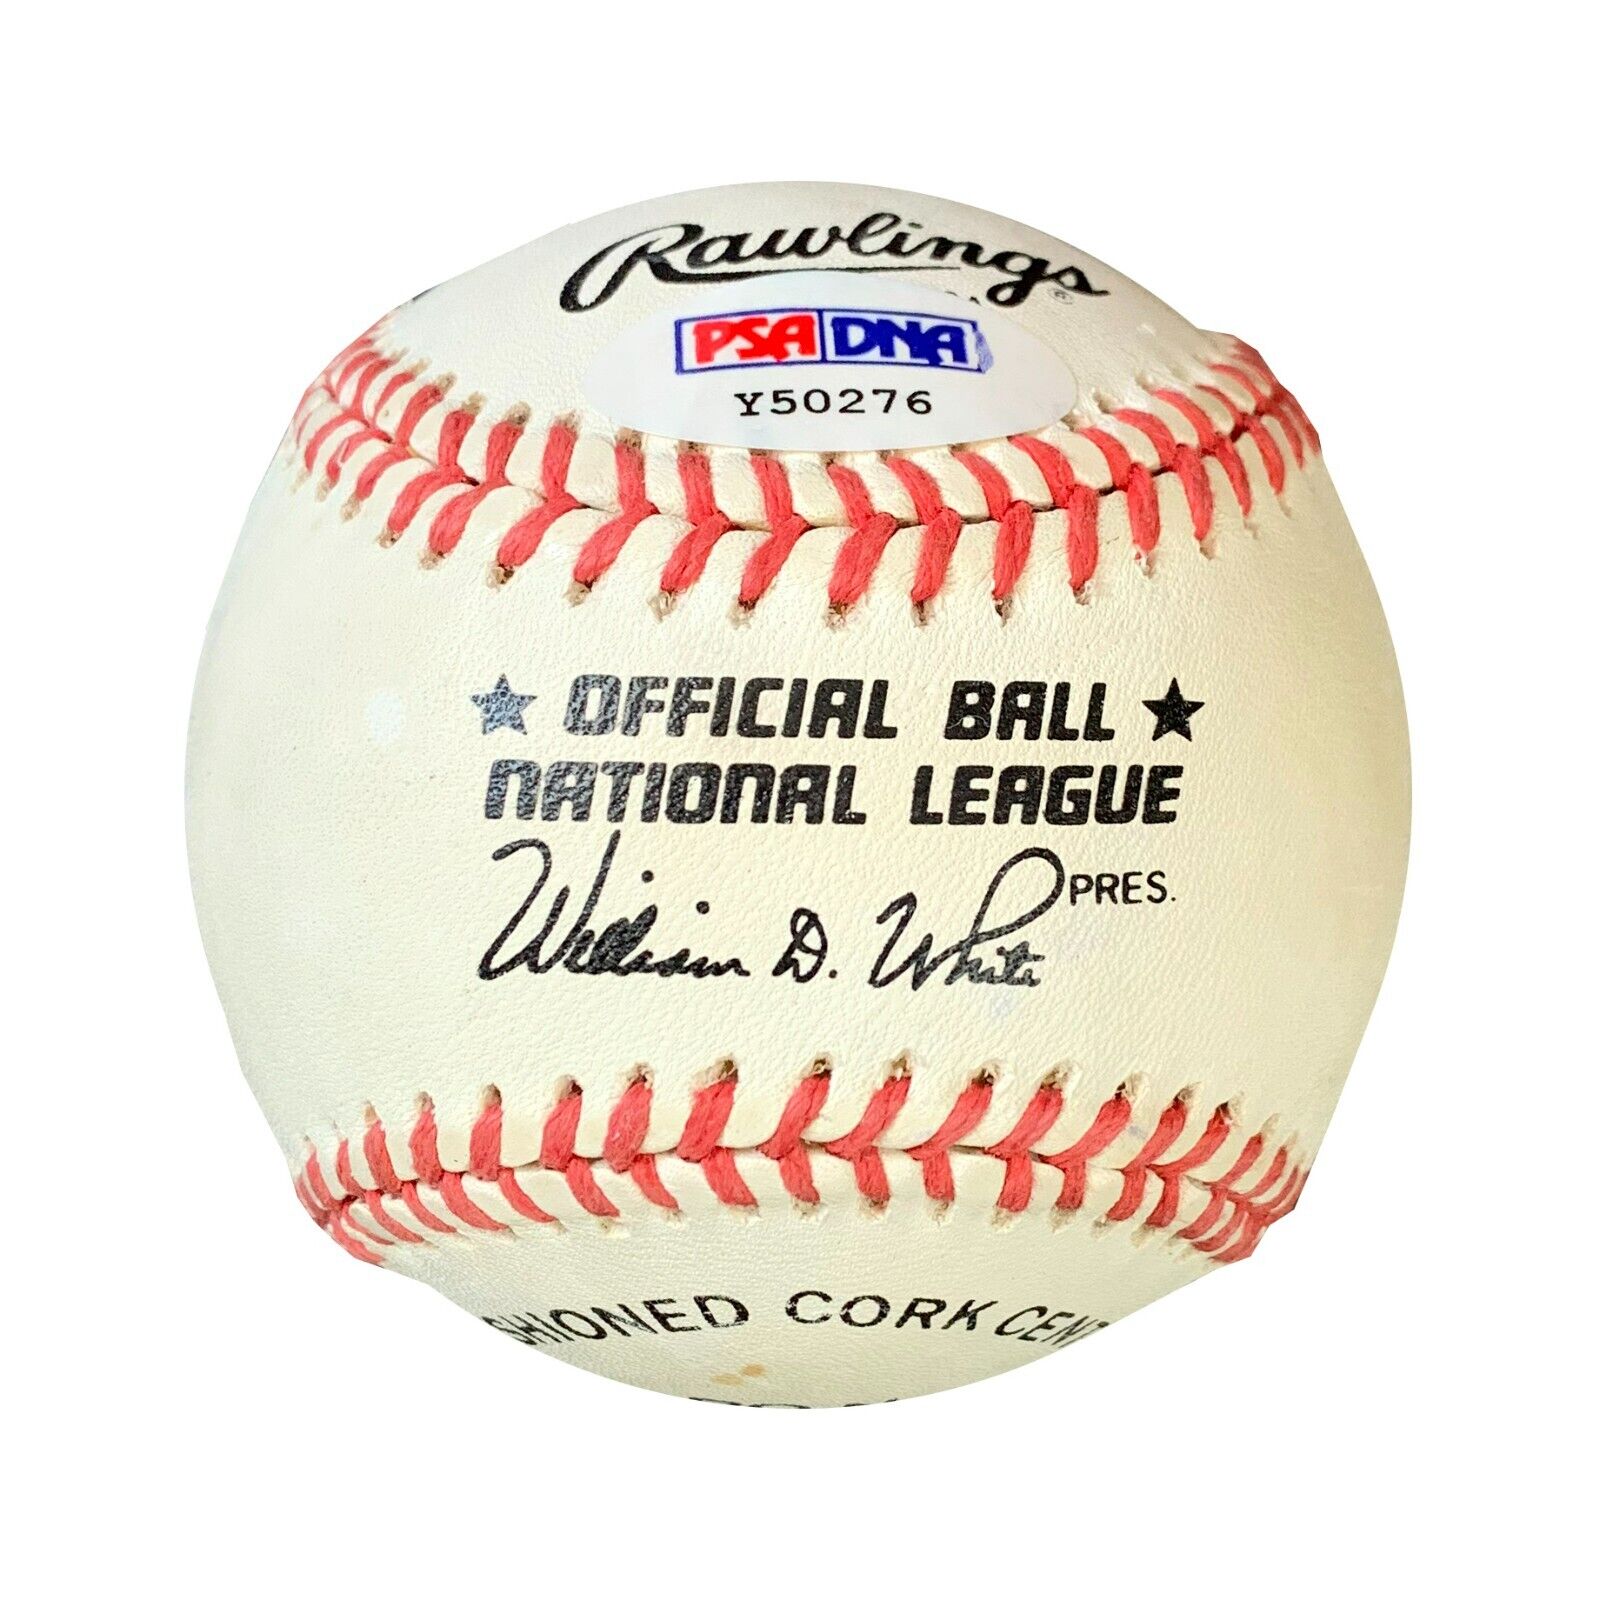 Hank Aaron Autographed Official ONLB Baseball PSA/DNA - 643-collectibles